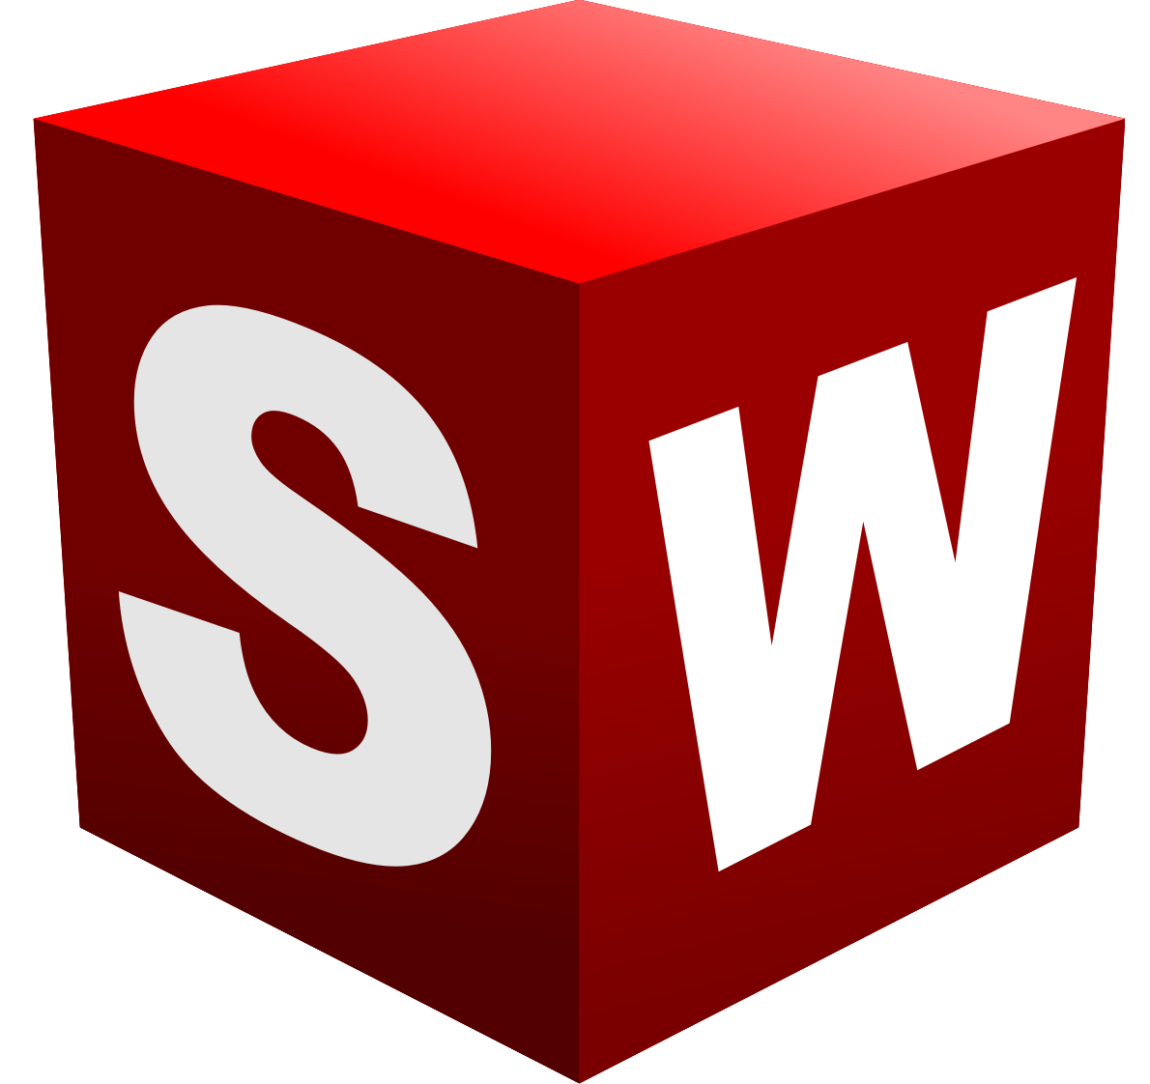 Download-Solidworks-2013-Free.png